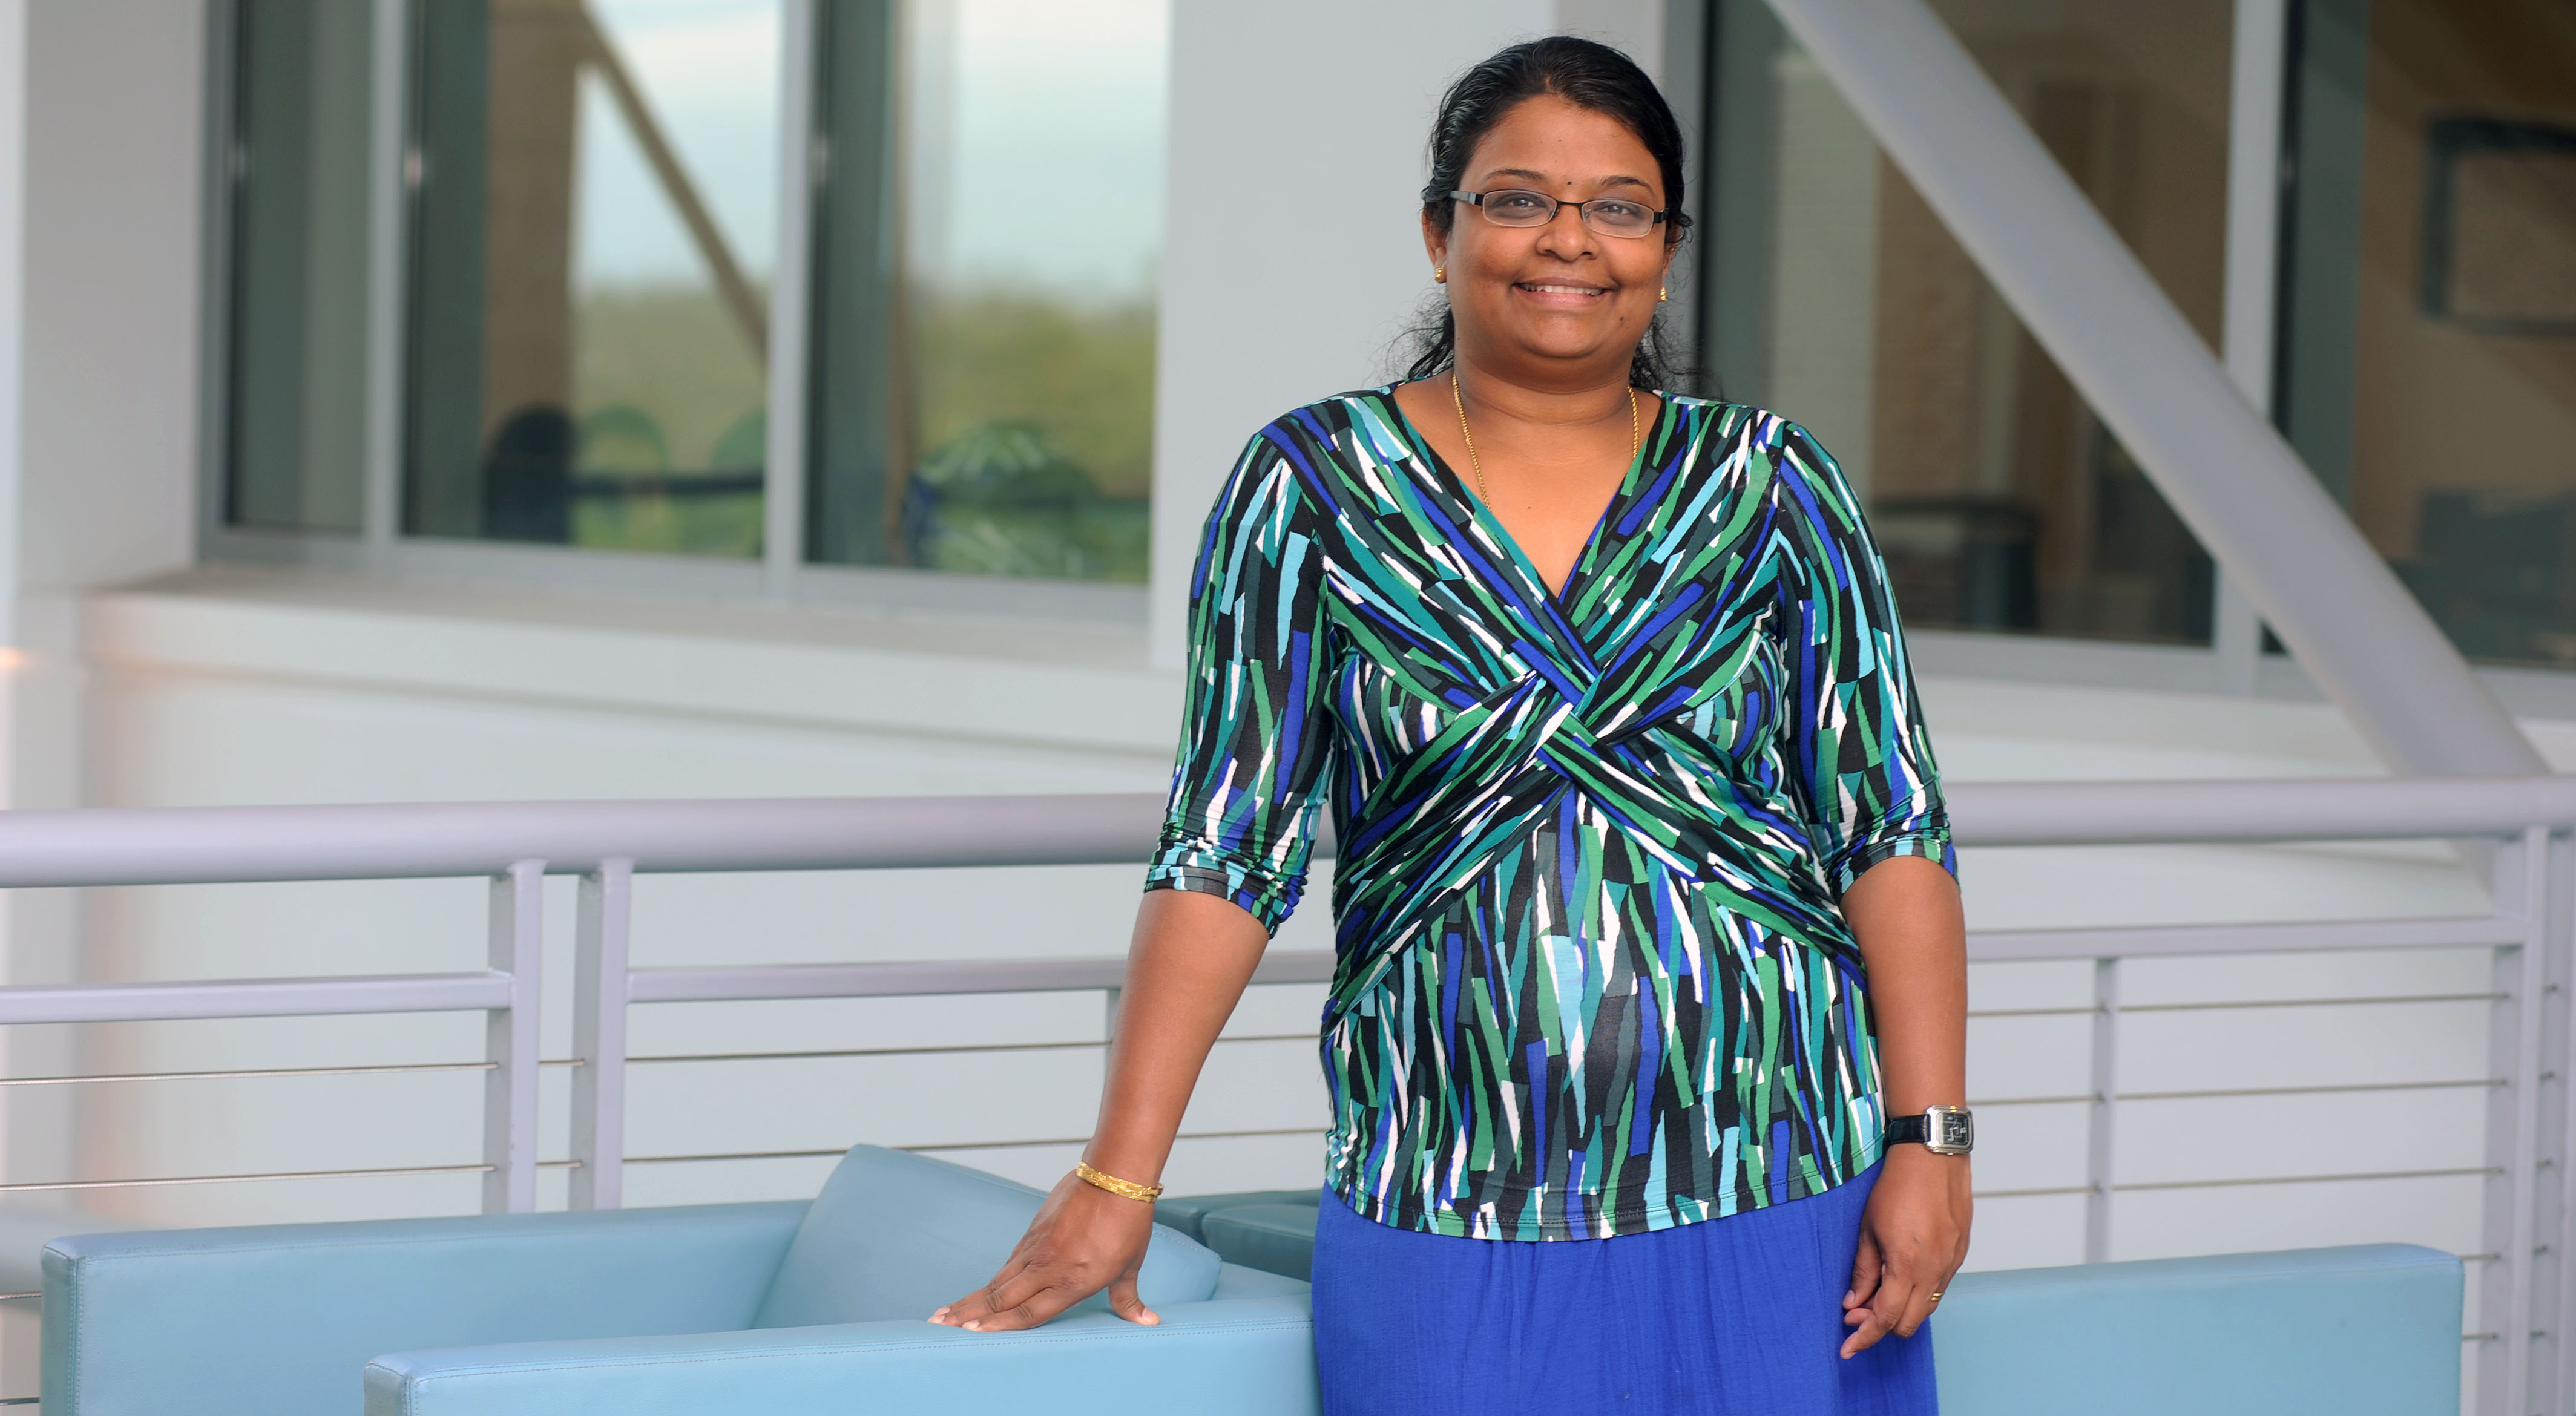 Dr. Bhuvaneswari Ramachandran, assistant professor in the University of West Florida Department of Electrical and Computer Engineering, focuses her research on sustainable and renewable energy sources.